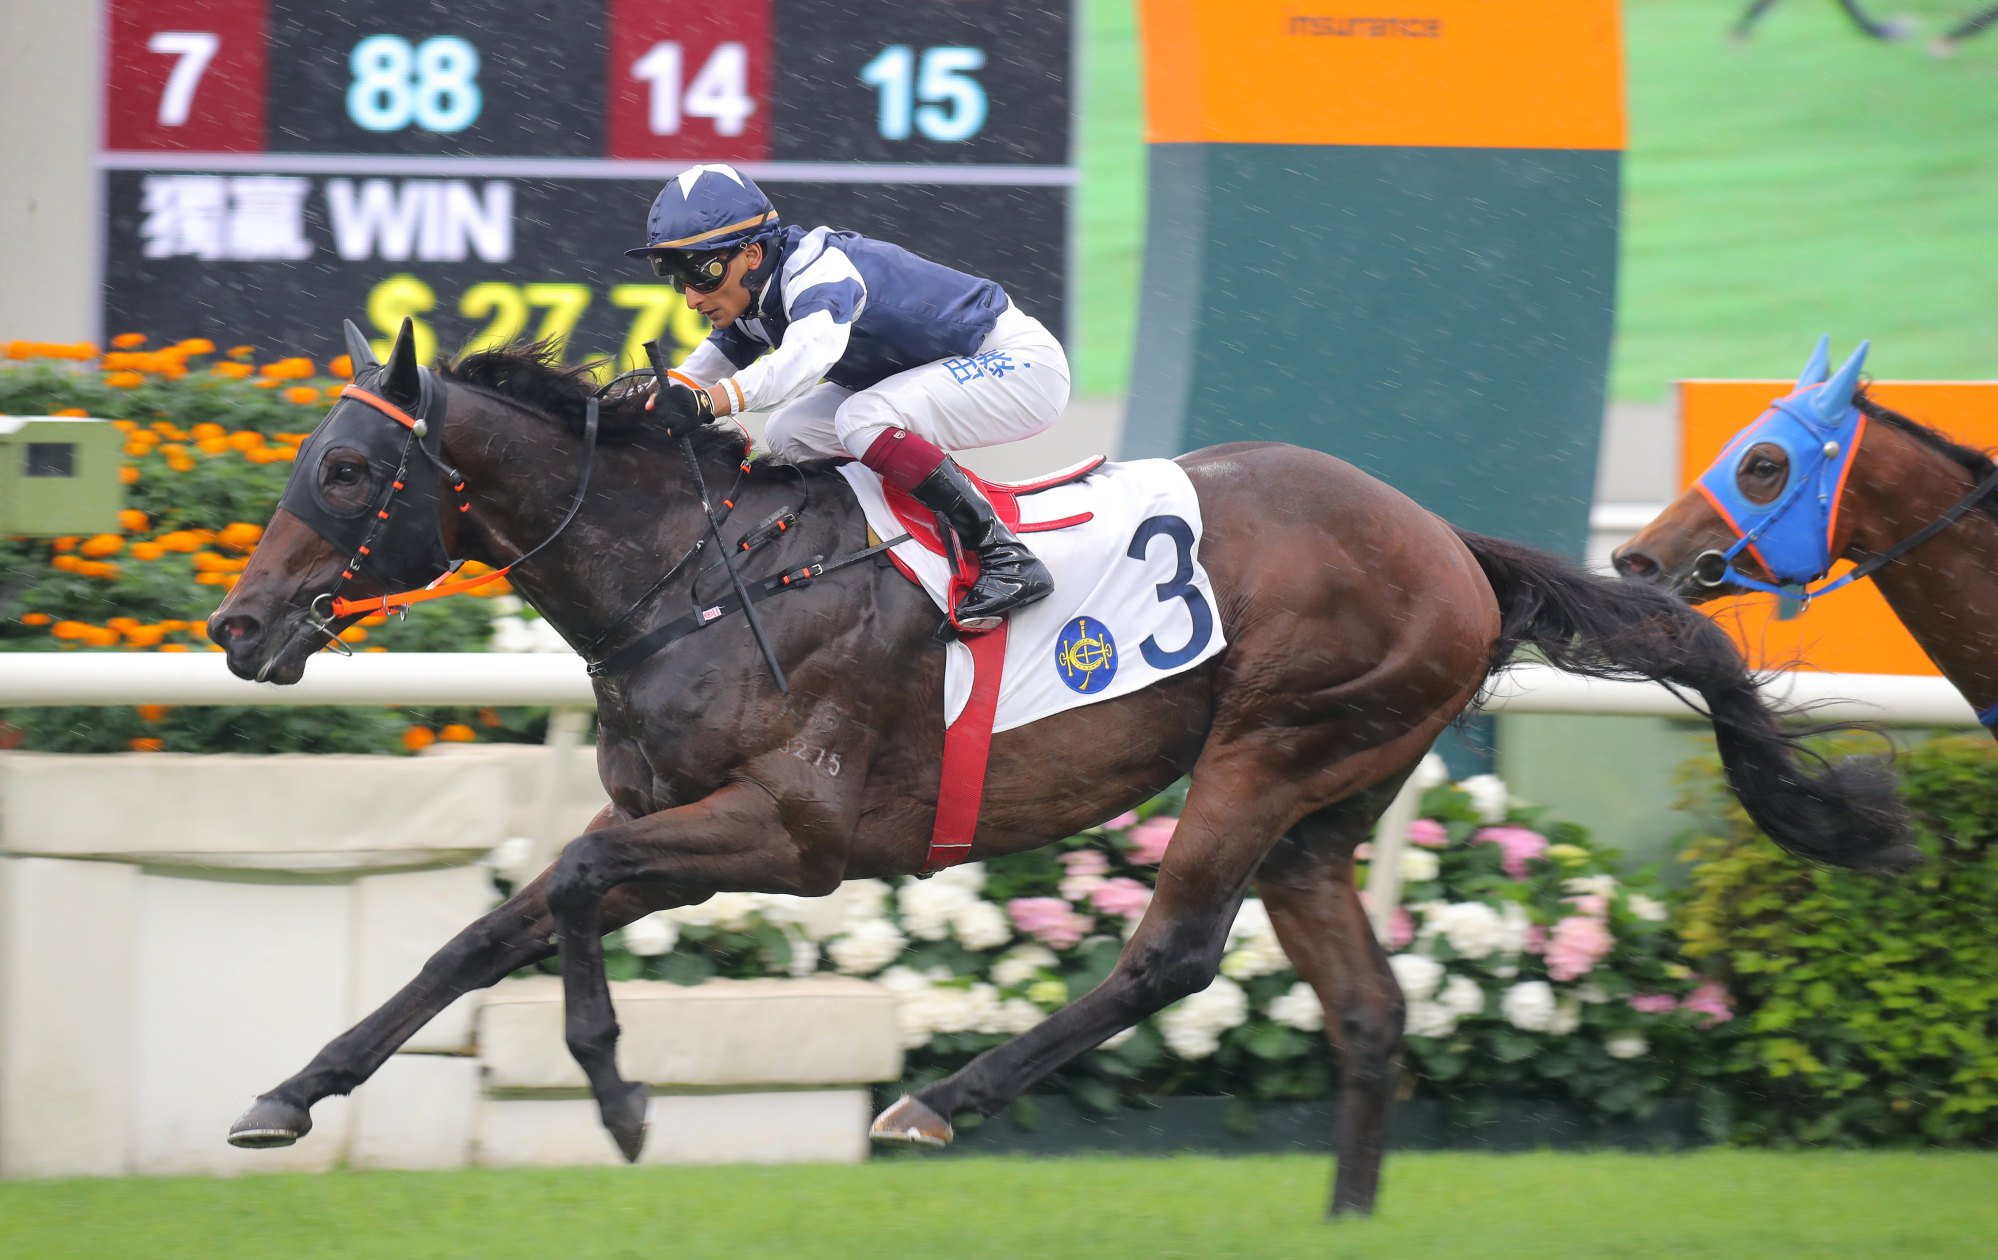 Karis Teetan guides Lucy In The Sky to victory at Sha Tin.